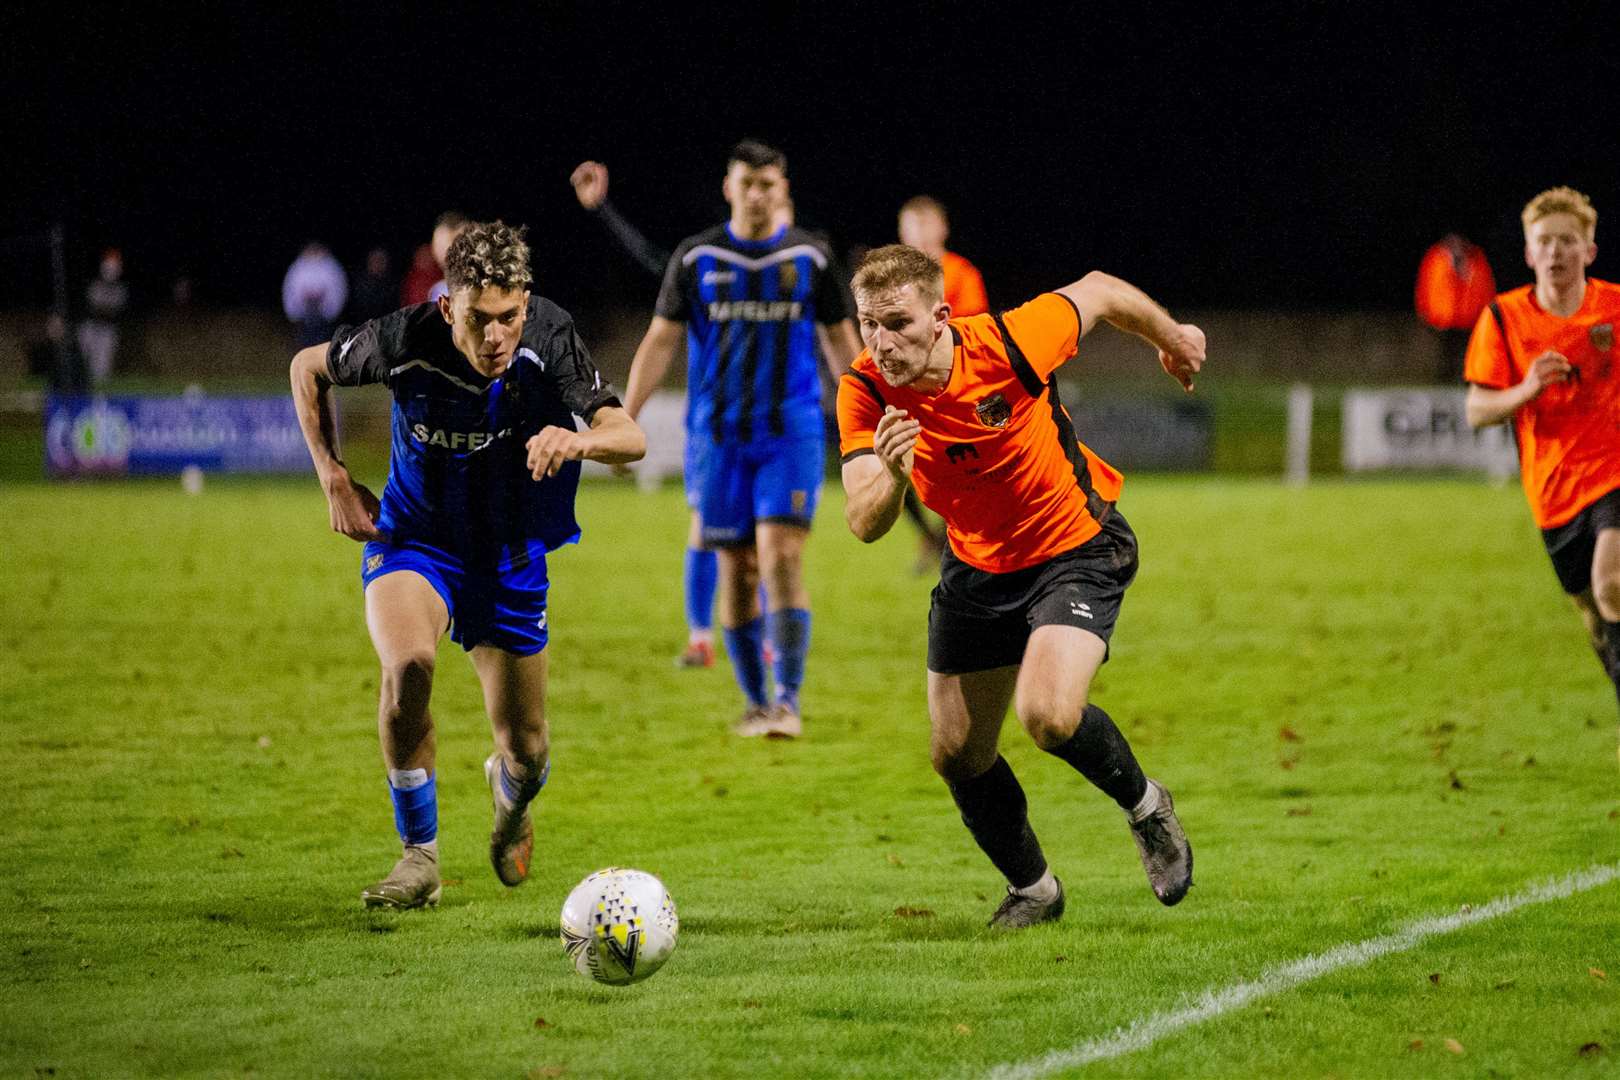 Huntly's Rhys Thomas and Rothes' Gary Kerr chases down the ball...Rothes FC (1) vs Huntly FC (0) - Highland Football League - Mackessack Park , Rothes 28/11/2020...Picture: Daniel Forsyth..